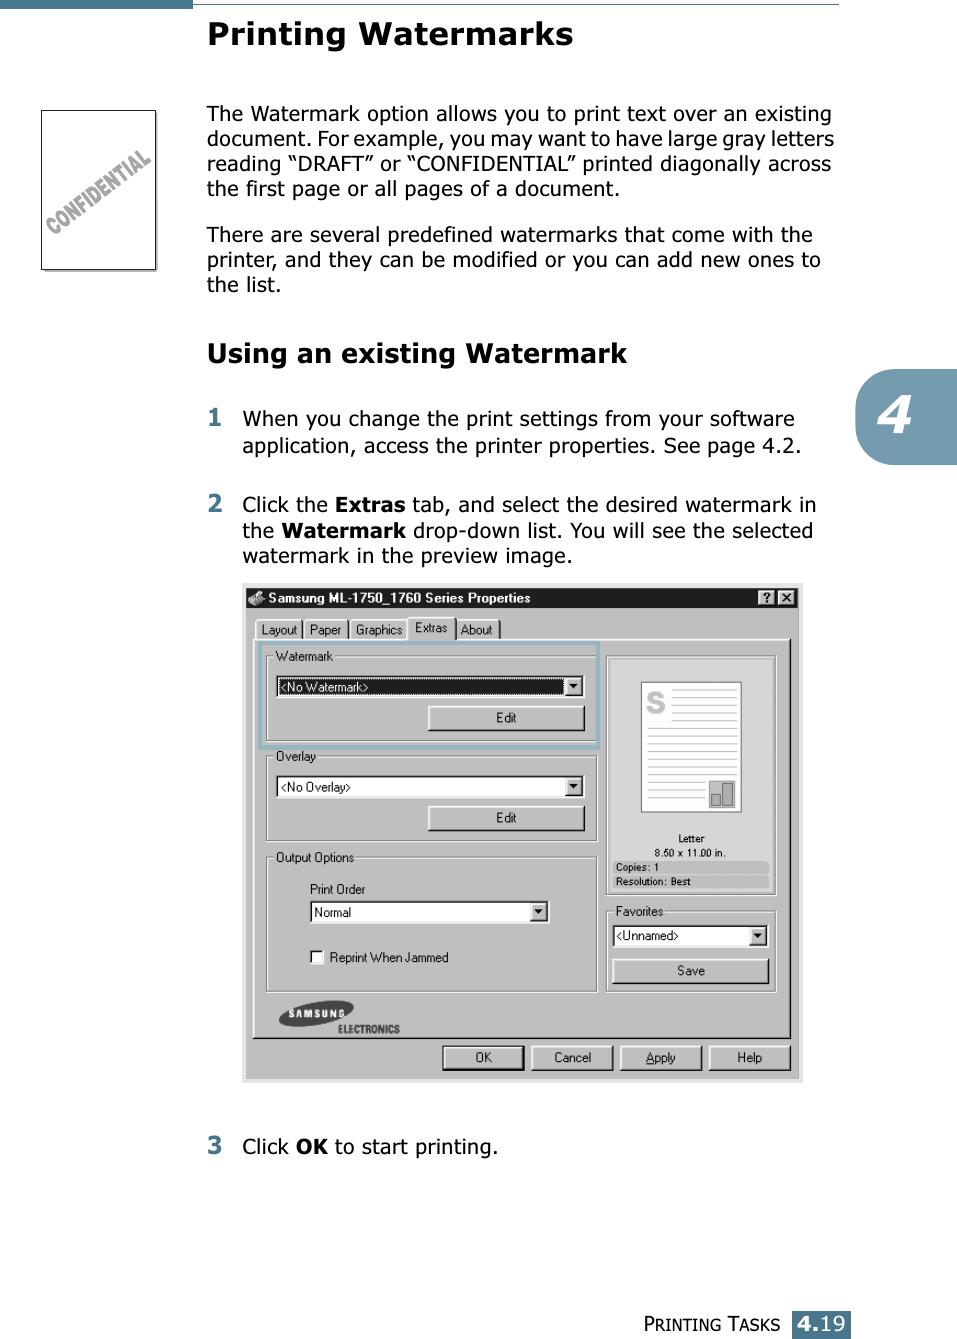 PRINTING TASKS4.194Printing WatermarksThe Watermark option allows you to print text over an existing document. For example, you may want to have large gray letters reading “DRAFT” or “CONFIDENTIAL” printed diagonally across the first page or all pages of a document. There are several predefined watermarks that come with the printer, and they can be modified or you can add new ones to the list. Using an existing Watermark1When you change the print settings from your software application, access the printer properties. See page 4.2. 2Click the Extras tab, and select the desired watermark in the Watermark drop-down list. You will see the selected watermark in the preview image. 3Click OK to start printing. 